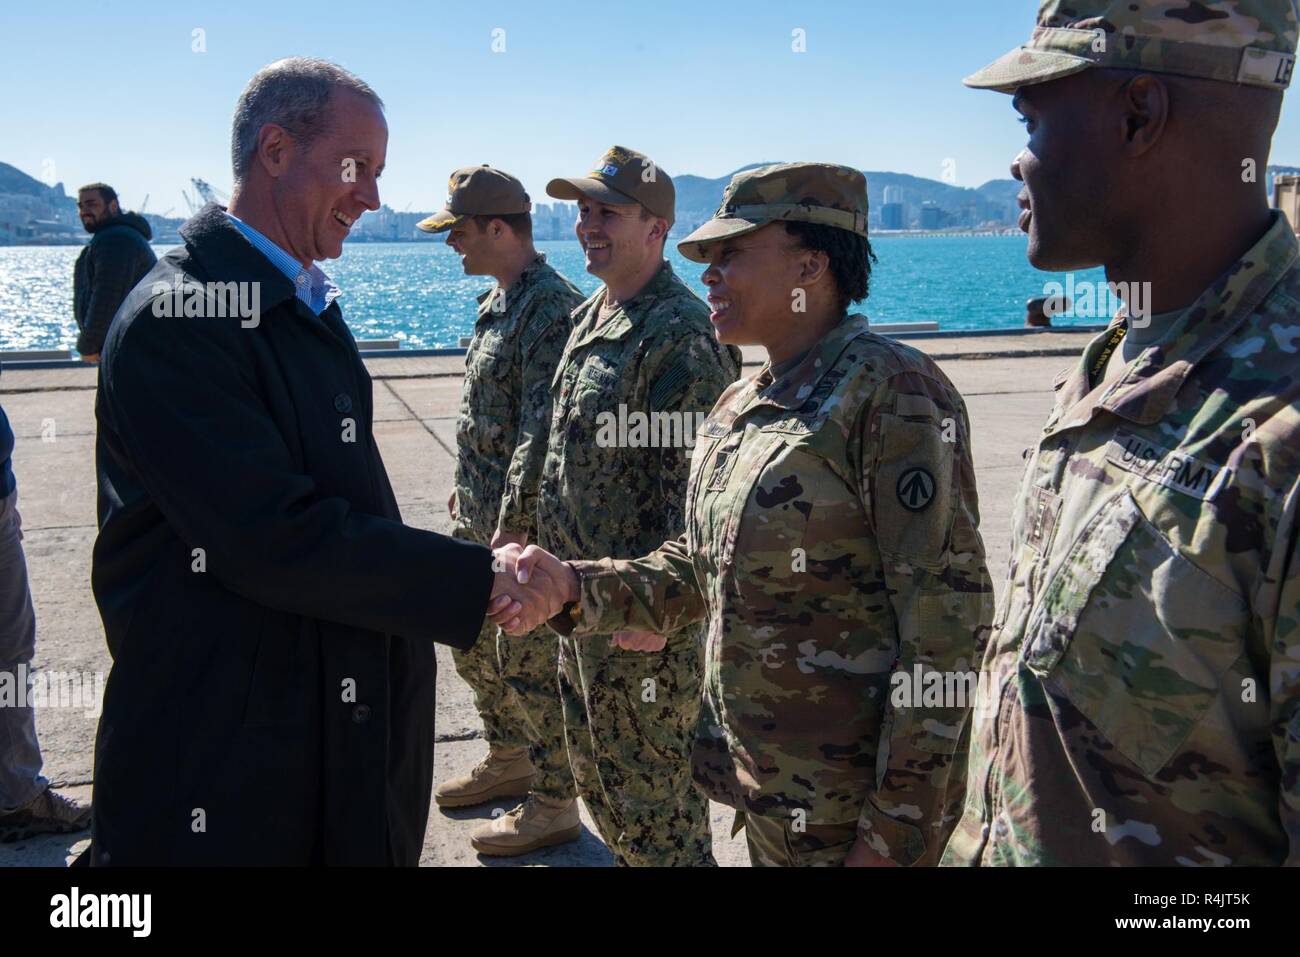 BUSAN, Republic of Korea (Oct. 30, 2018) U.S. Rep. William McClellan 'Mac' Thornberry, chairman of the House Armed Services Committee (HASC), meets with service members assigned to U.S. Forces Korea at Pier 8 in Busan. Thornberry's visit to Pier 8 is a part of an overall site visit to the Korean peninsula to meet with U.S. military components and gain a better understanding of the U.S. and ROK alliance. Stock Photo